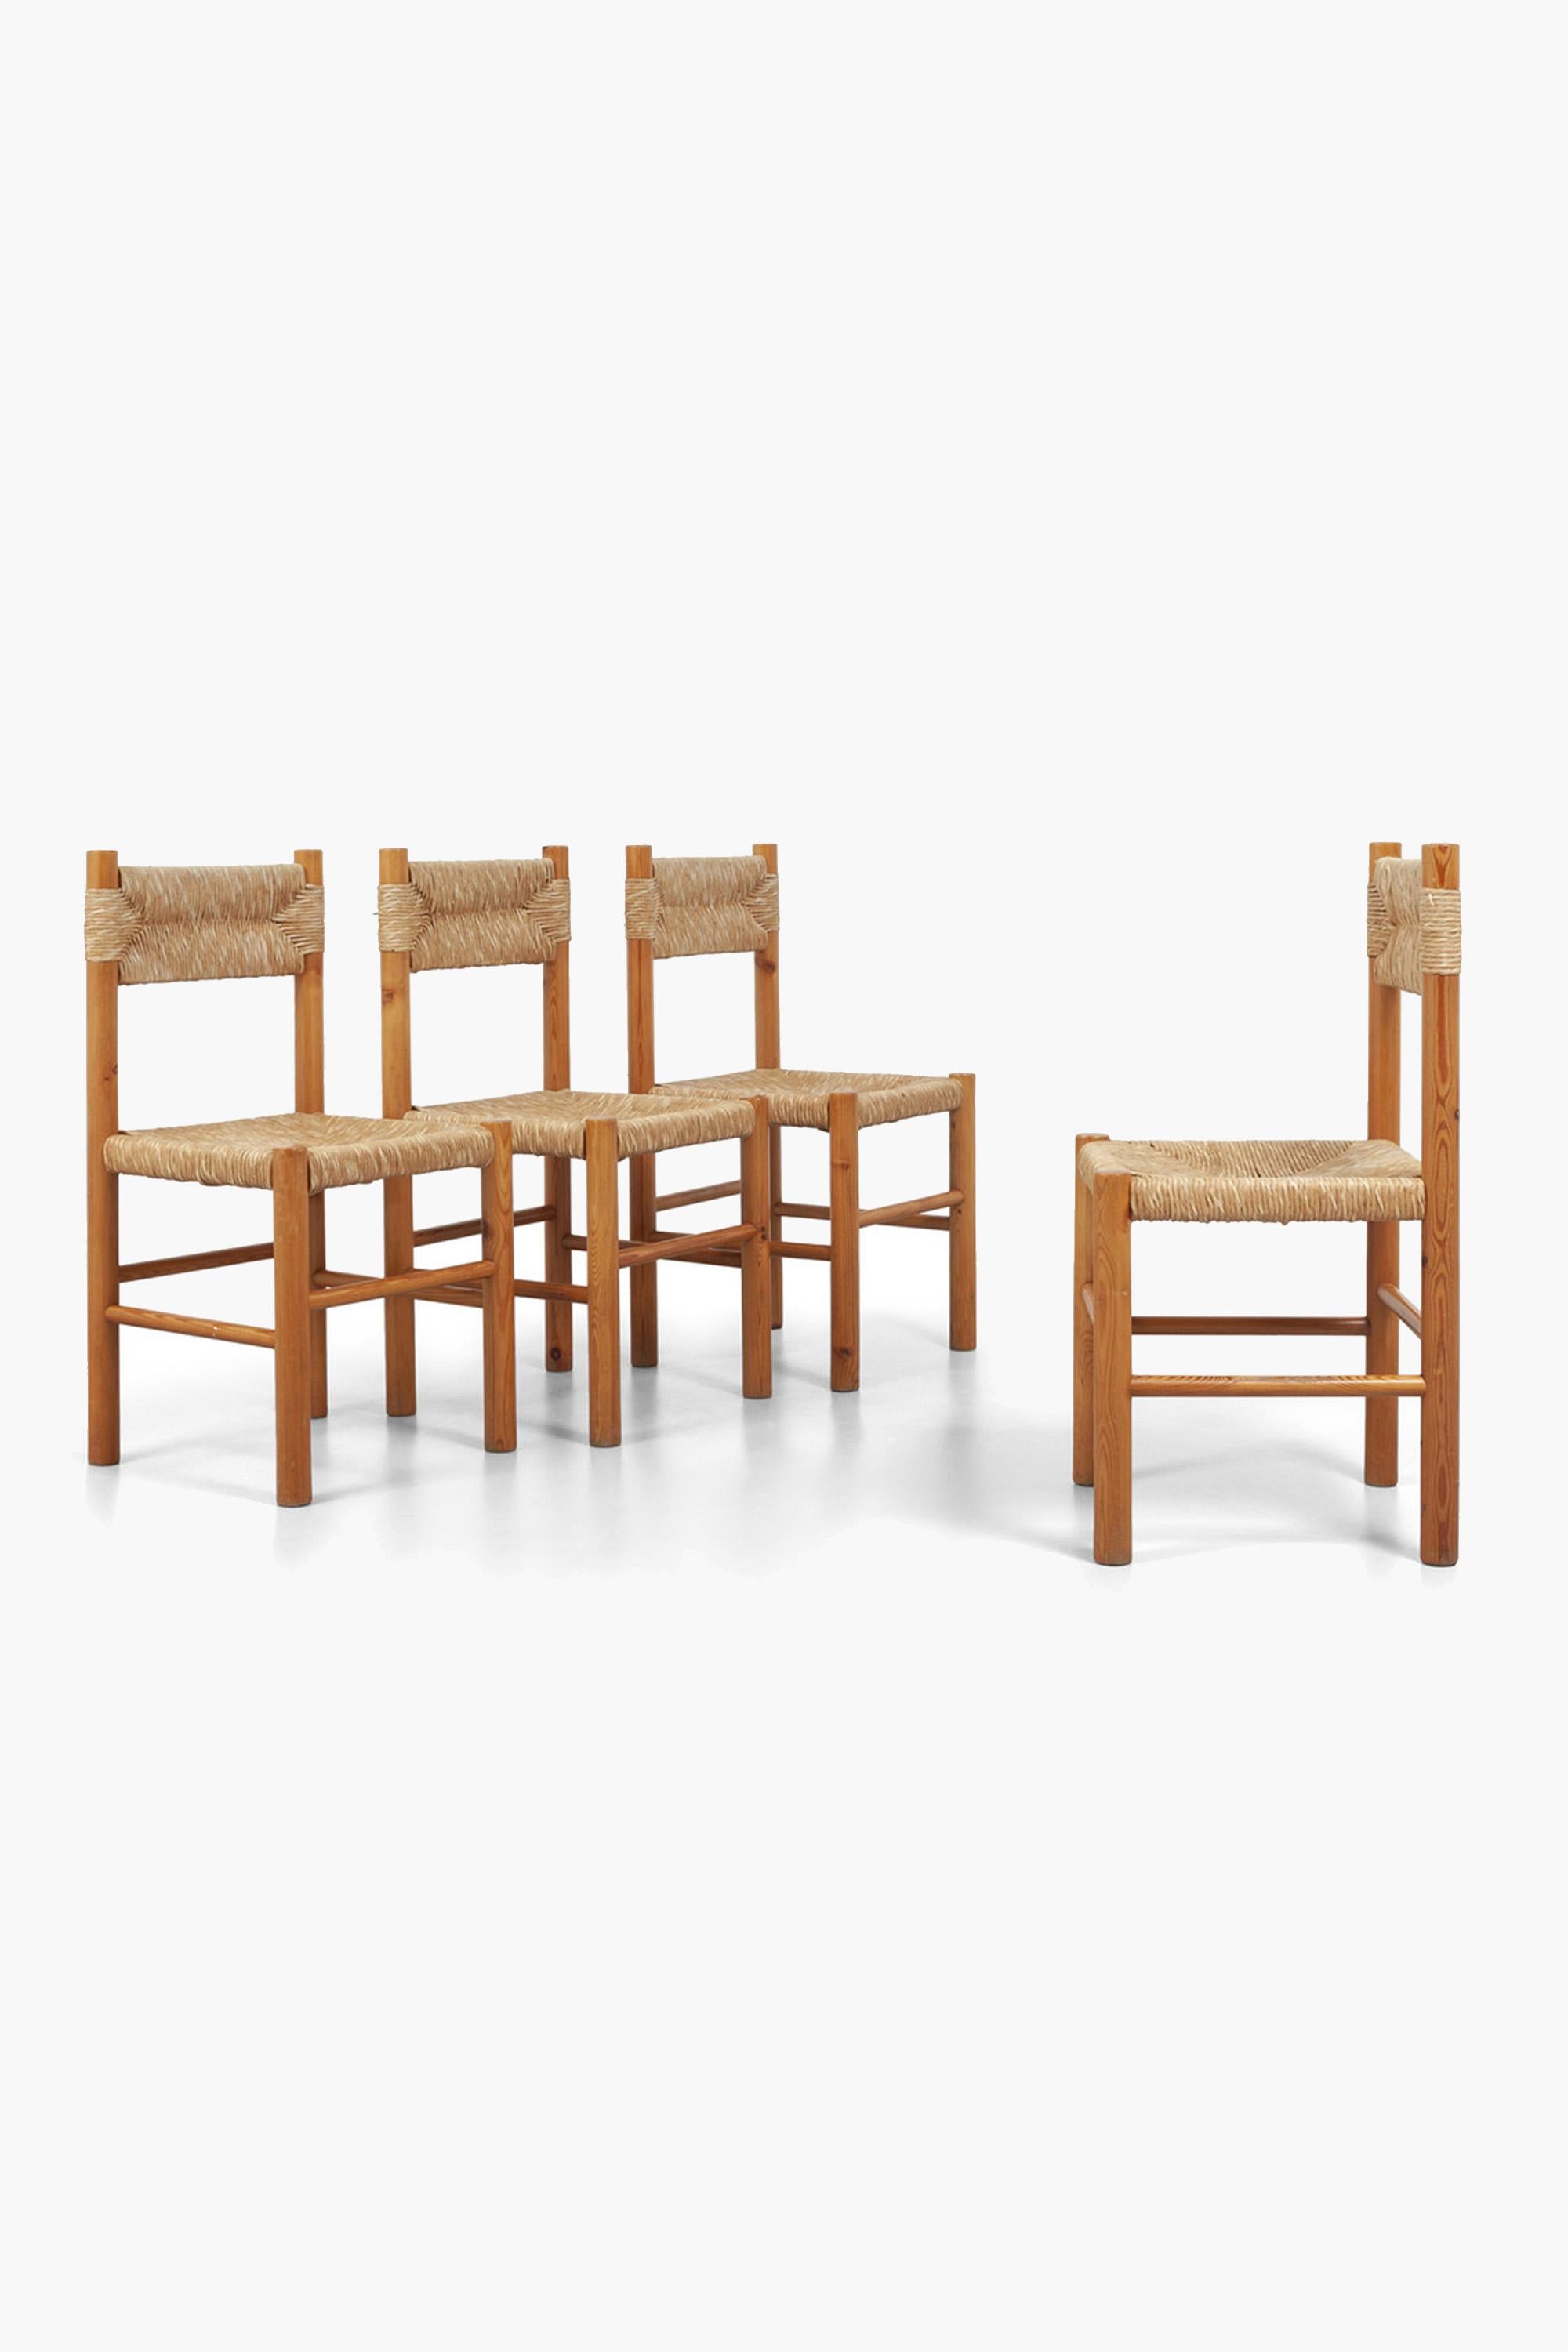 Set of four Pine & Rush 'Dordogne' style dining chairs, 1960s

A set of four 1960s French rush dining chairs in the style of the 'Dordogne' chair designed by Charlotte Perriand for Robert Sentou.

All solid with original rush seats in good